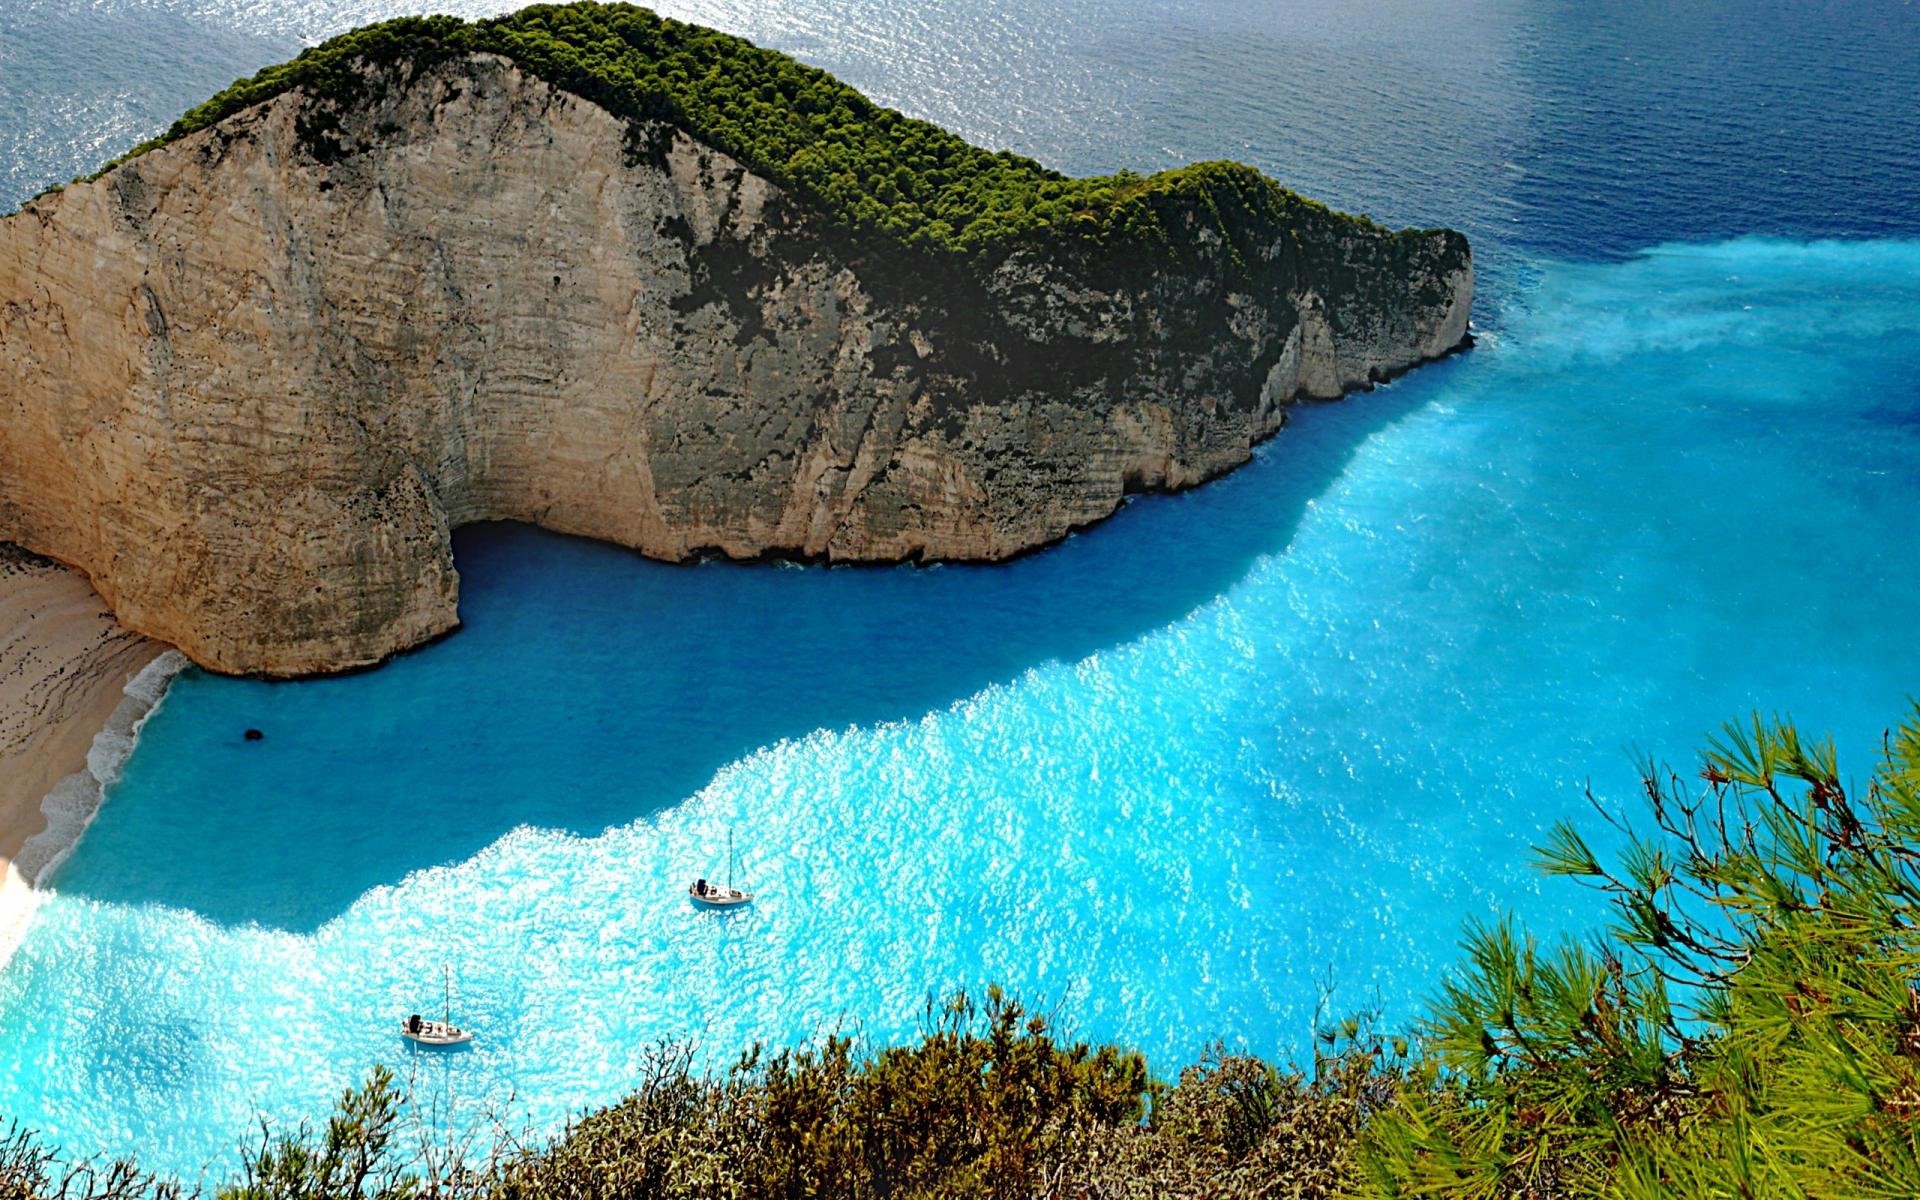  provide you to Free HD WallpapersGet Gorgeous Hd Wallpapers Greece